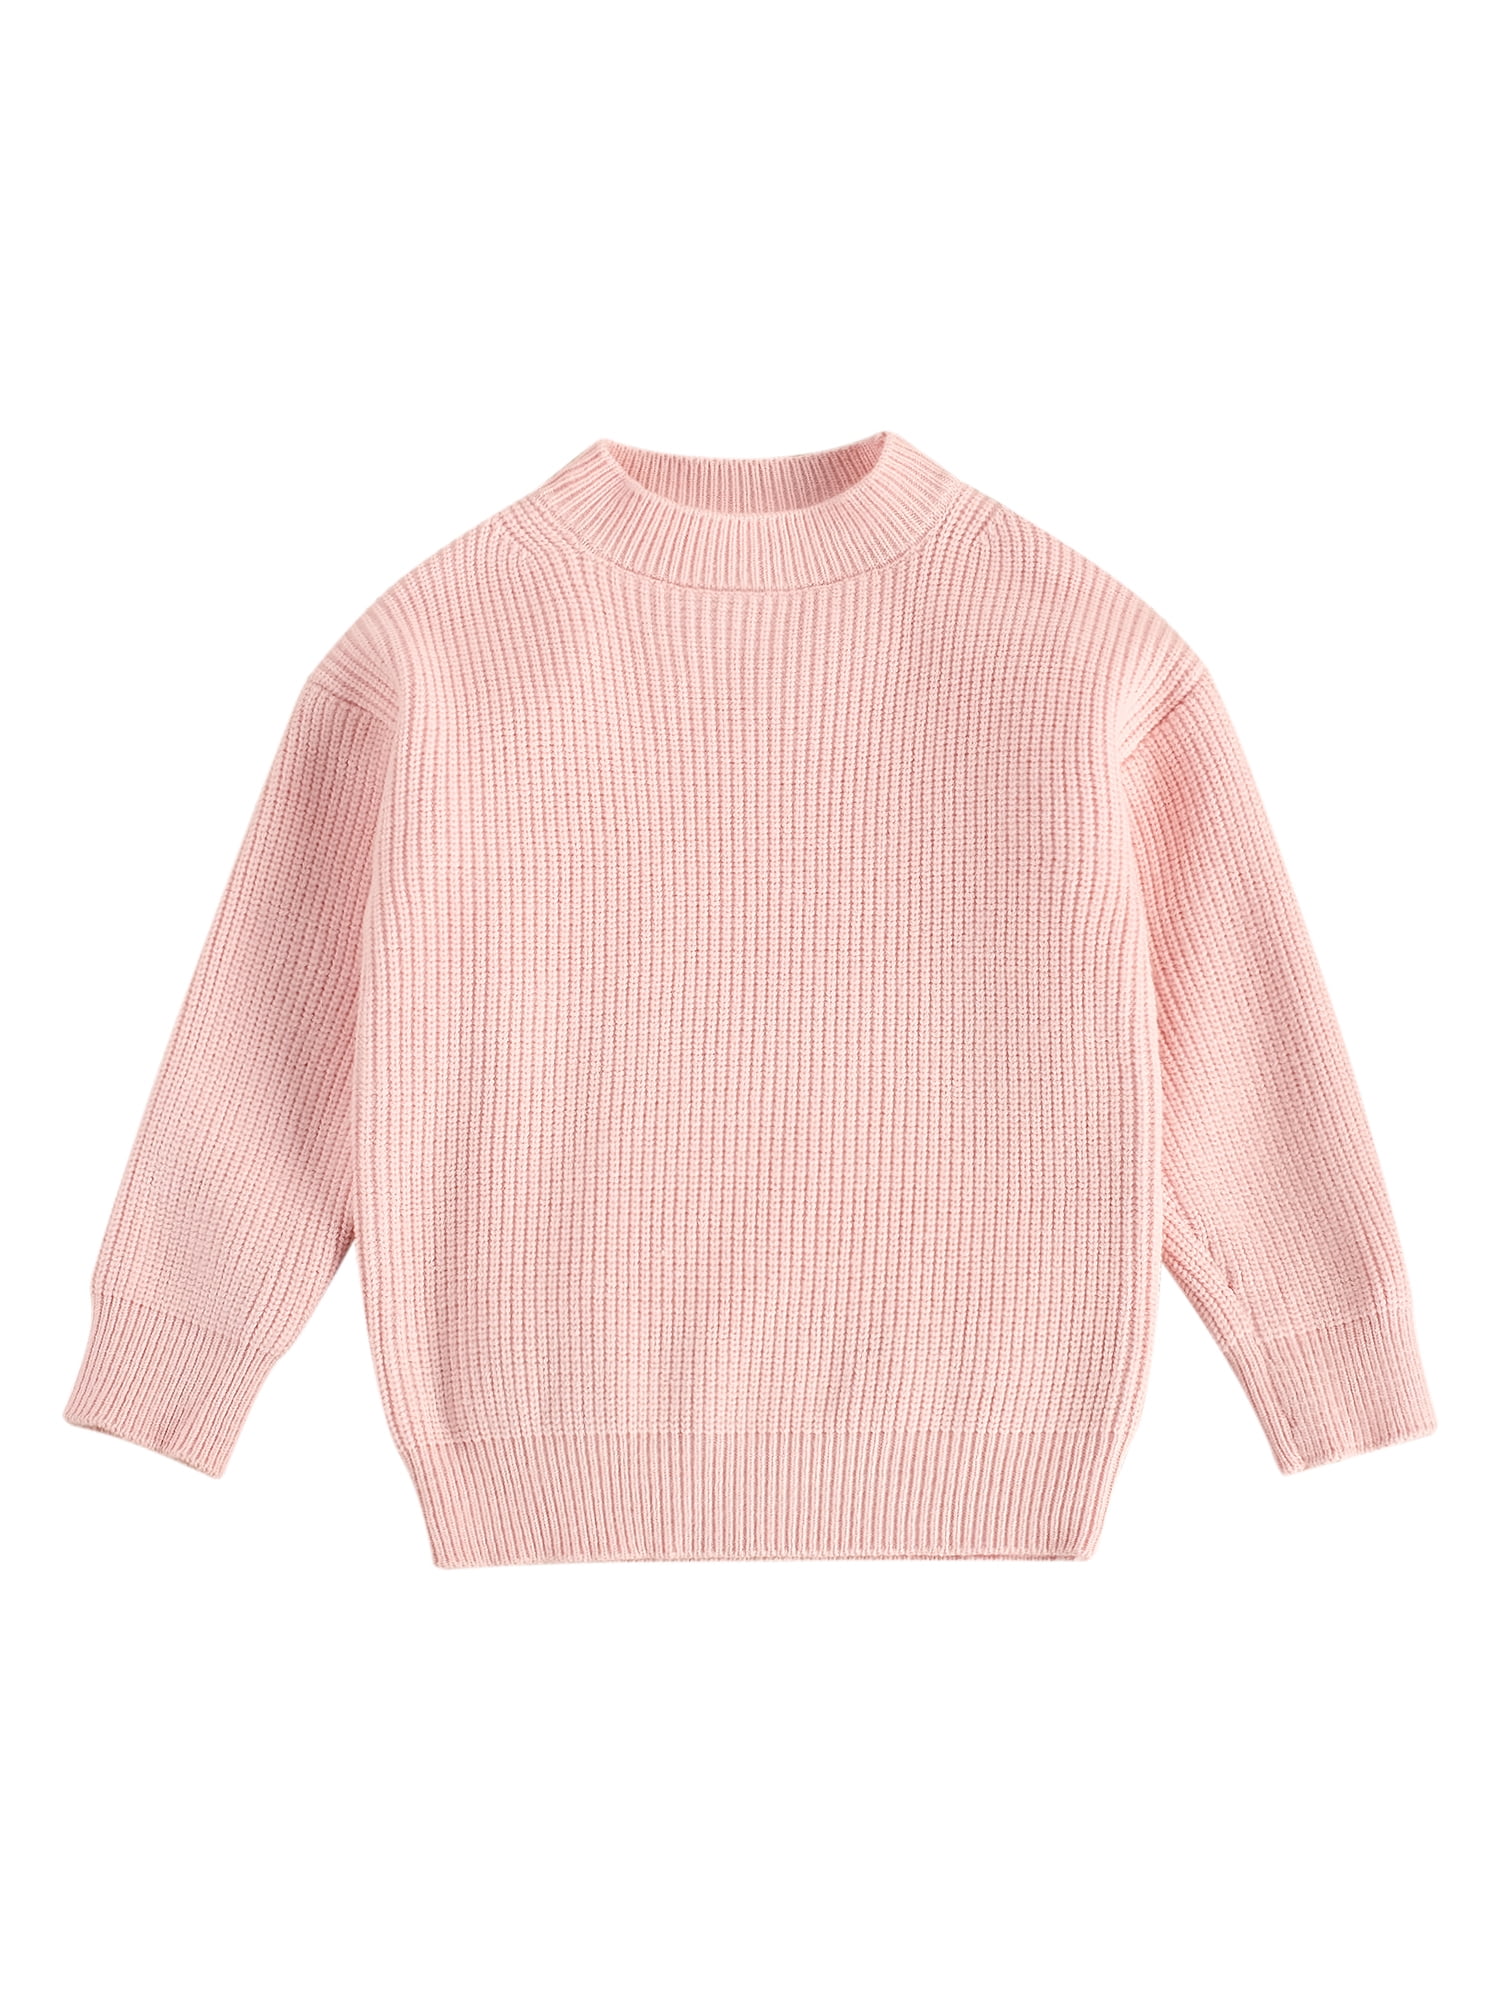 Toddler Baby Girl Boy Knit Sweater Loose Solid Color Long Sleeve Warm Pullover Tops Fall Winter Clothes